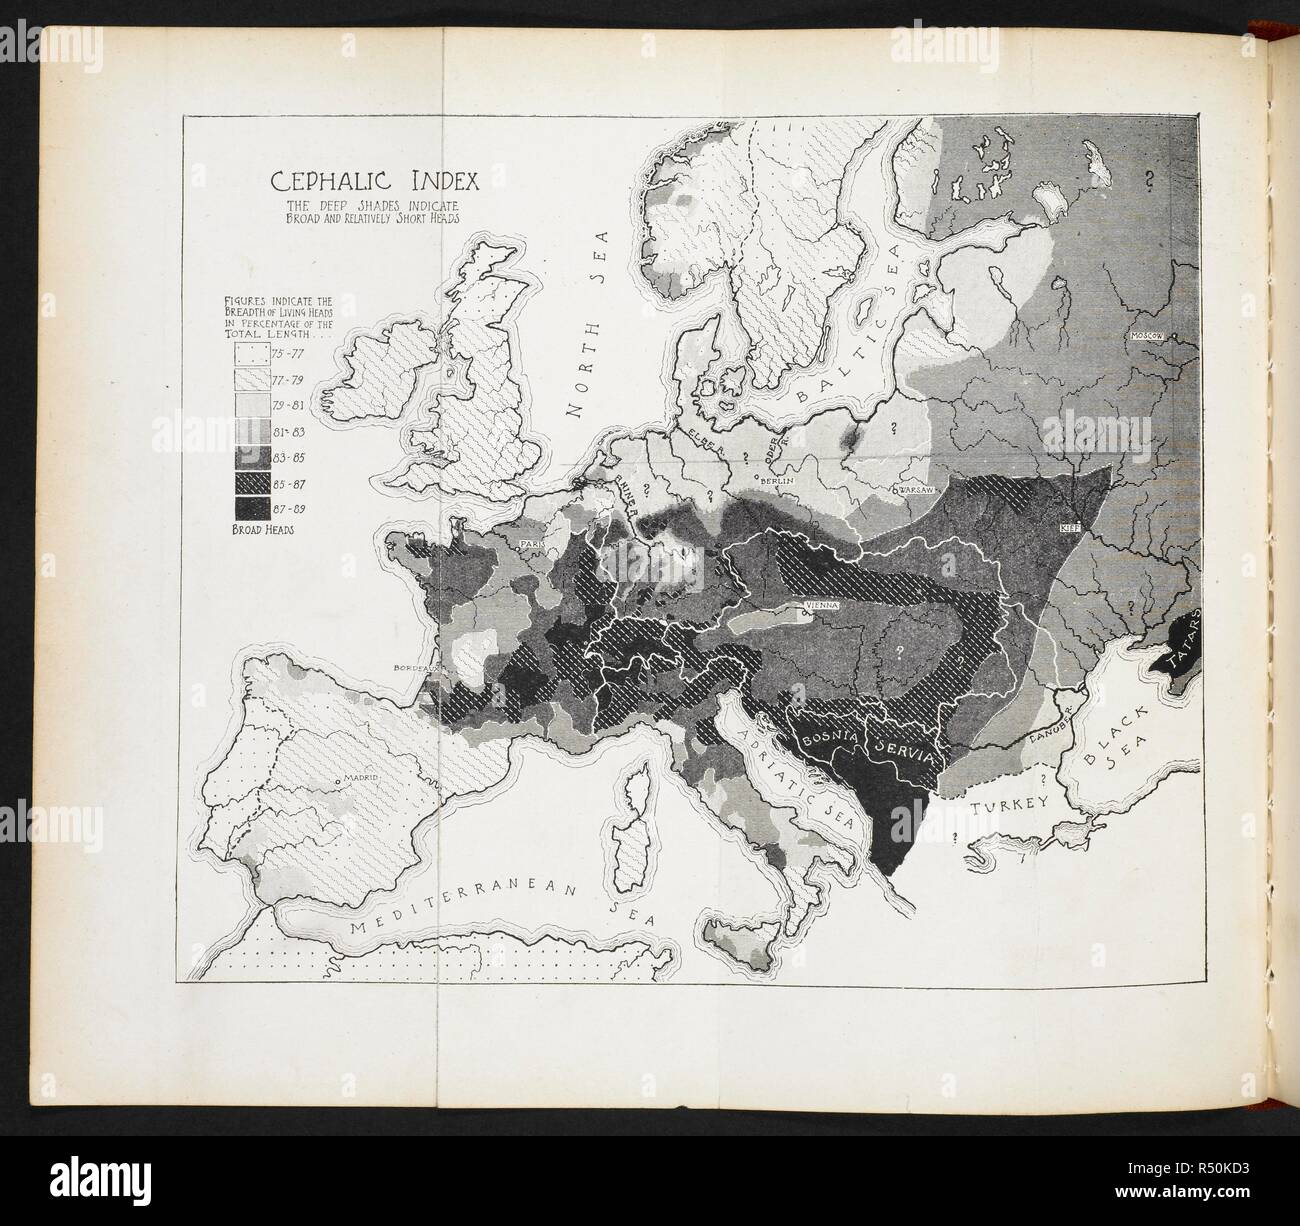 Cephalic Index of Europe. The Races of Europe: a sociological study. Lowell Institute Lectures ... Accompanied by a supplementary bibliography of the anthropology and ethnology of Europe, published by the Public Library of the City of Boston. New York : D. Appleton & Co., 1899. Source: W49/4706 facing p.53. Author: ANON. Ripley, William Z. Stock Photo